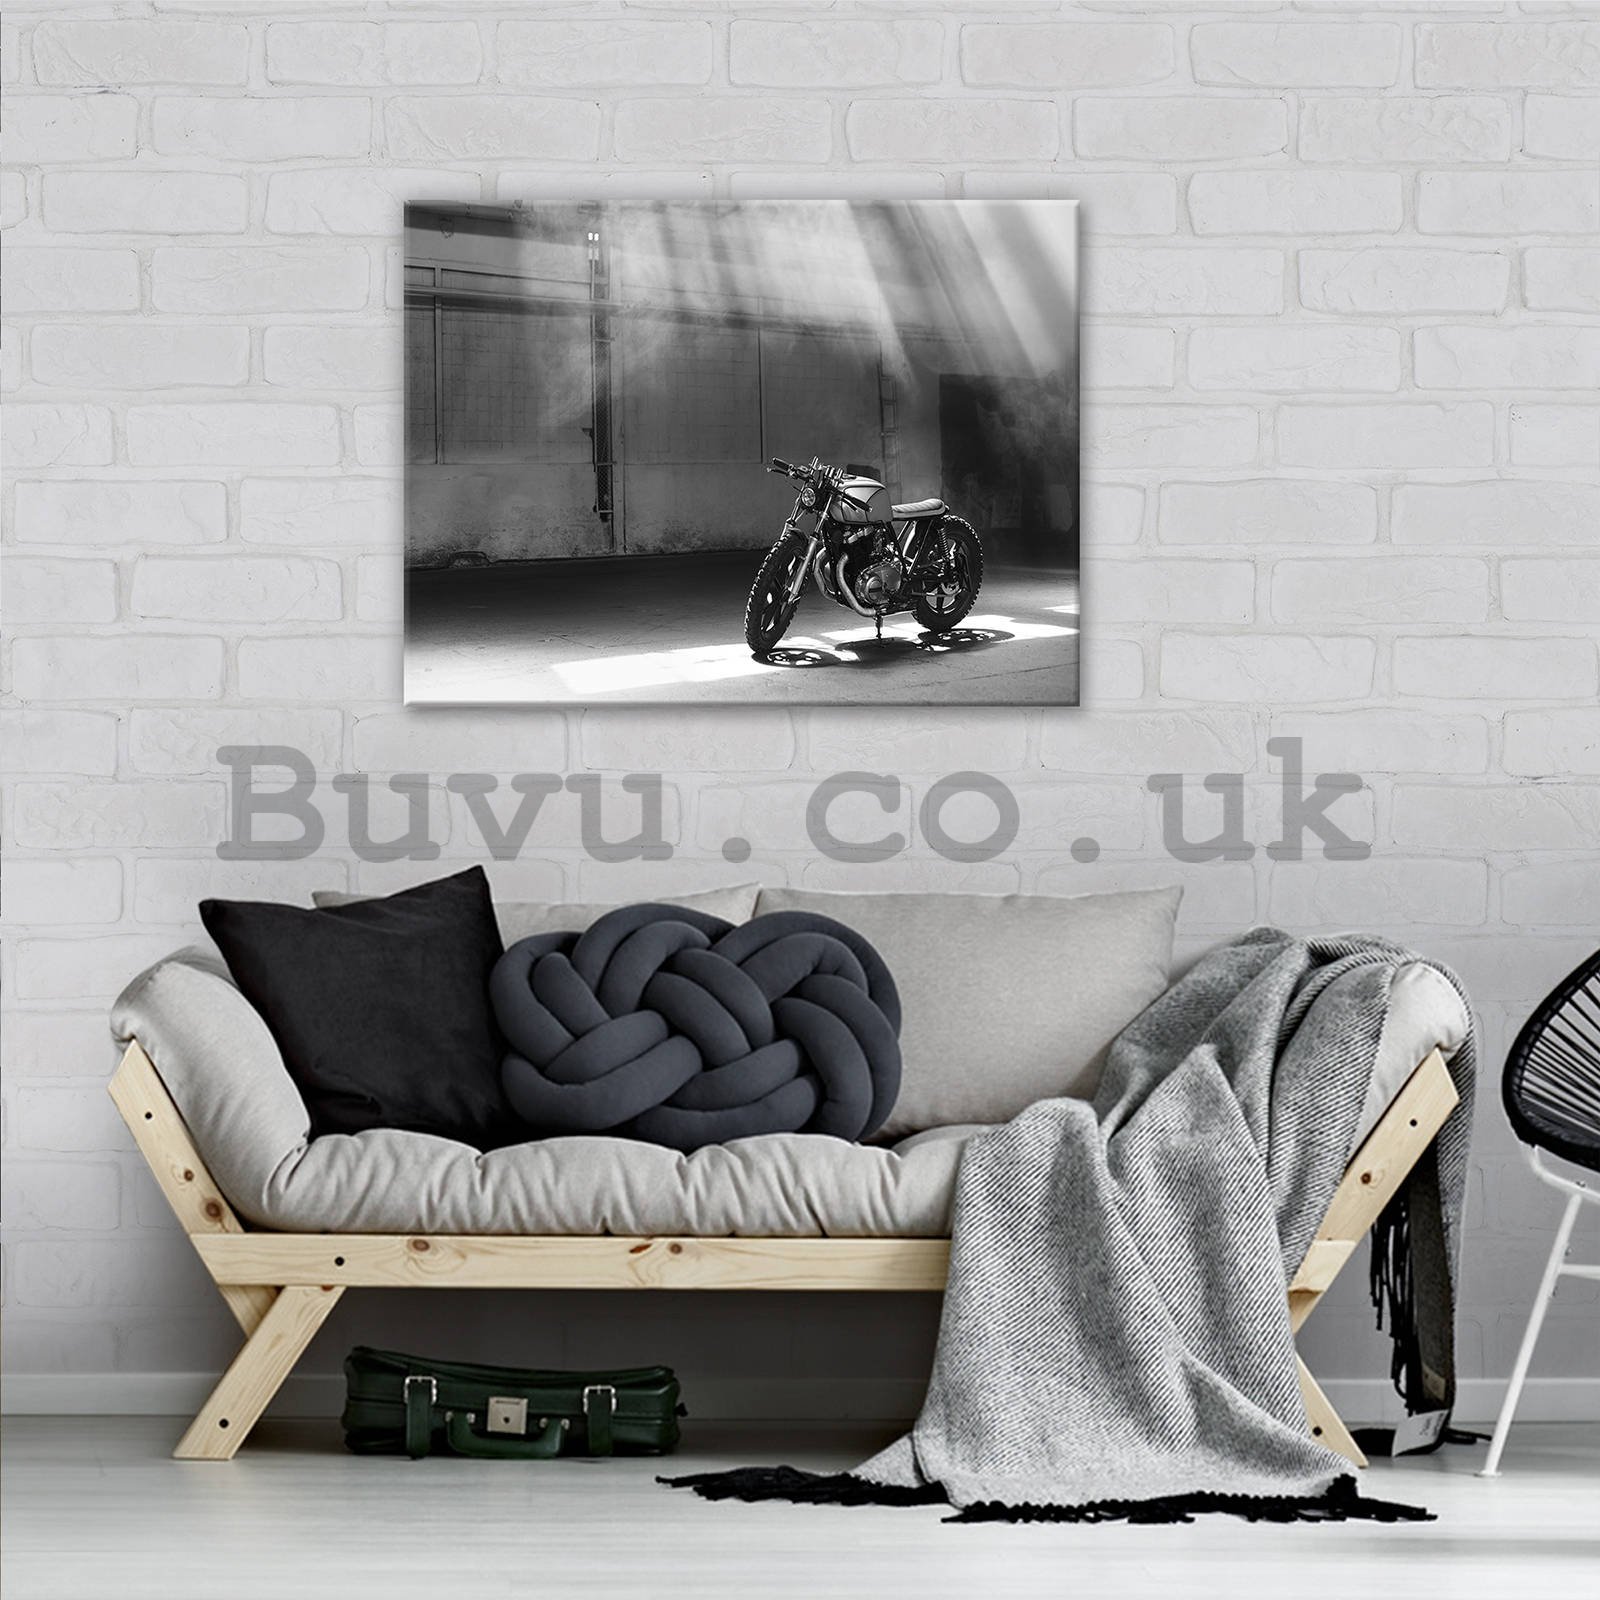 Painting on canvas: Parked motorcycle (black and white) - 80x60 cm